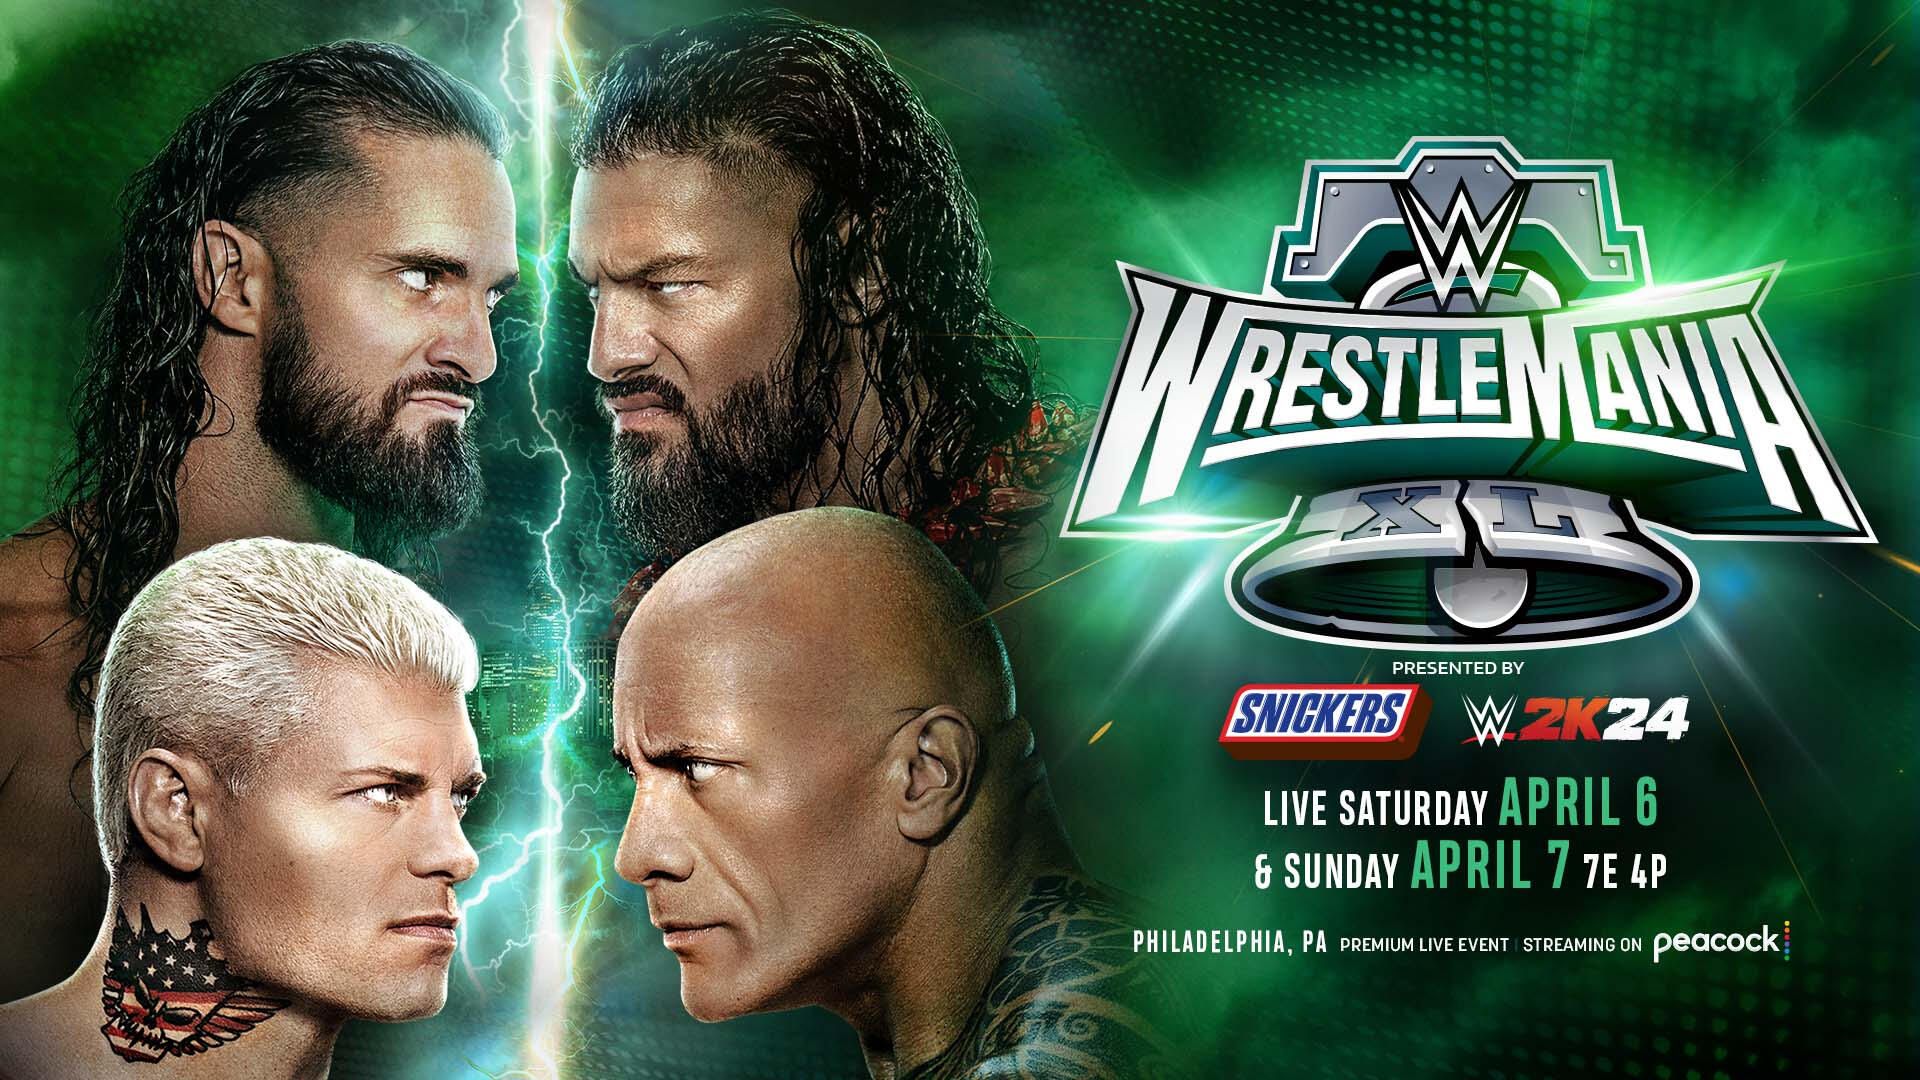 Newly Released Information on Ticket Sales for Upcoming WWE Events